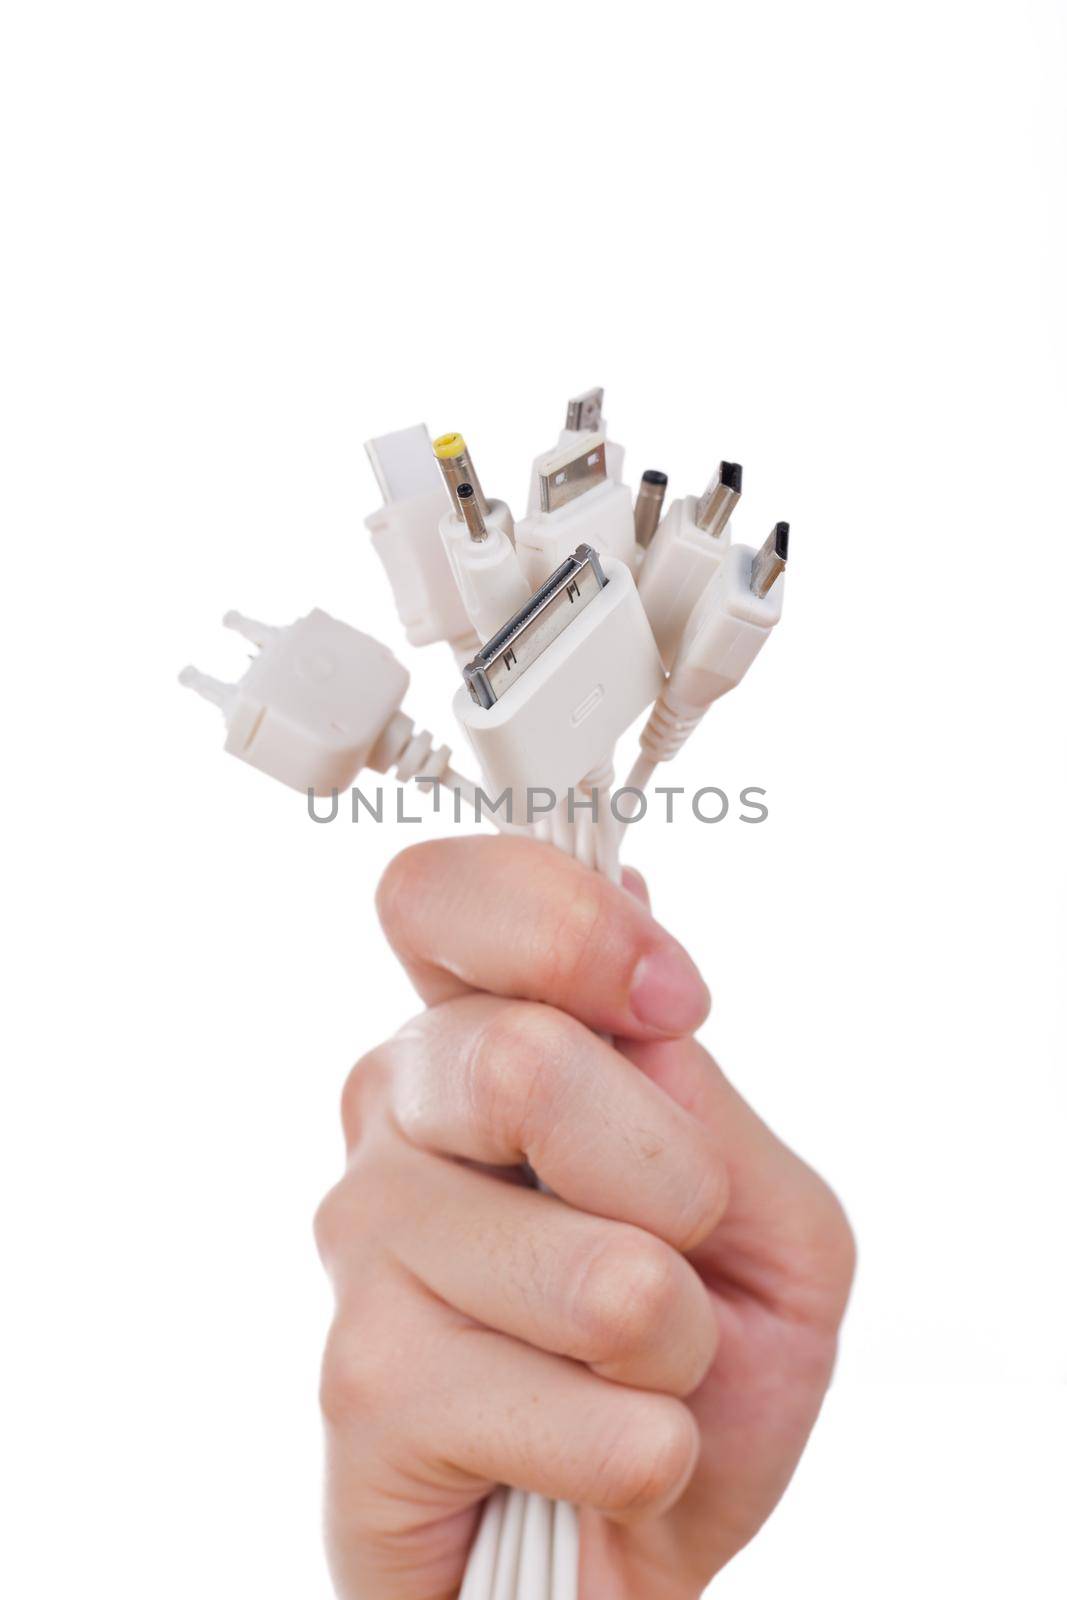 Female hand holding USB port tools charger isolated white background.